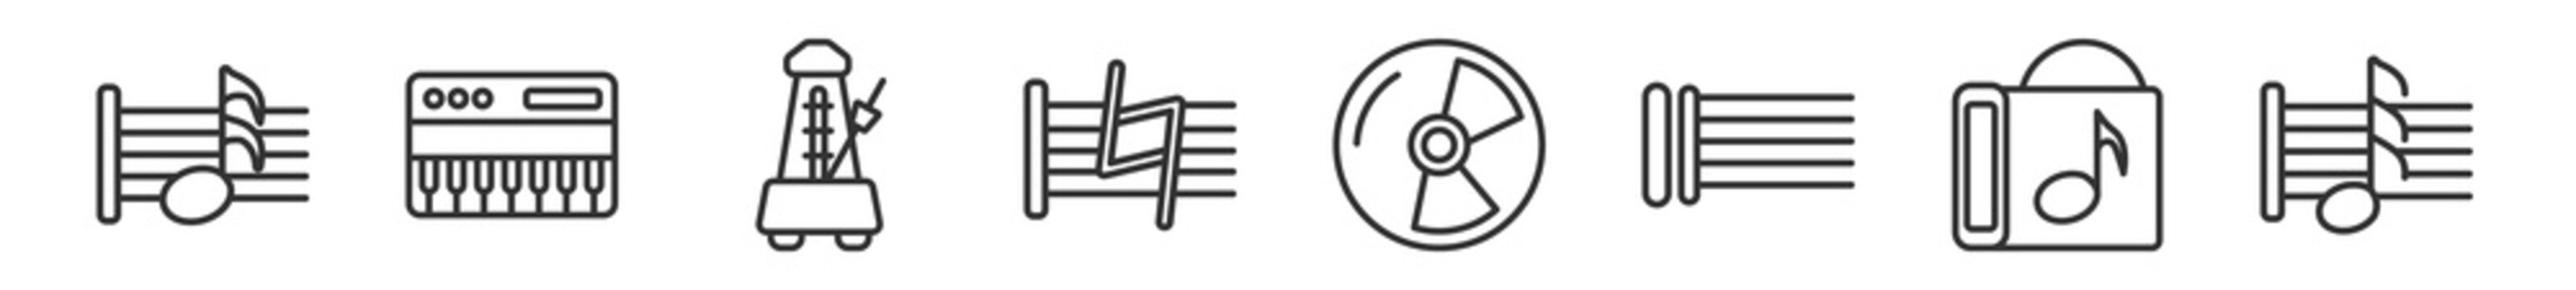 outline set of music and media line icons. linear vector icons such as sixteenth note, music keyboard, metronome, natural, dvd disc, thirty second note. vector illustration.